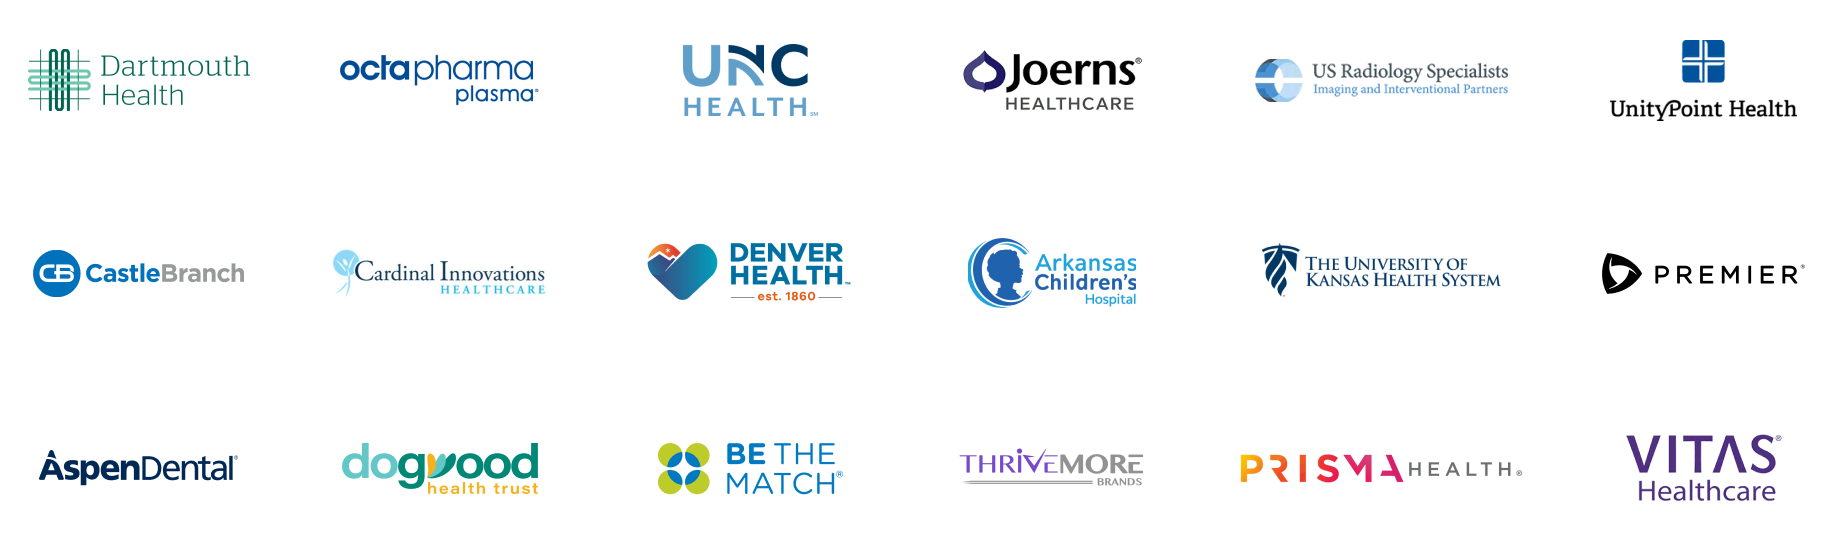 out client logos from healthcare